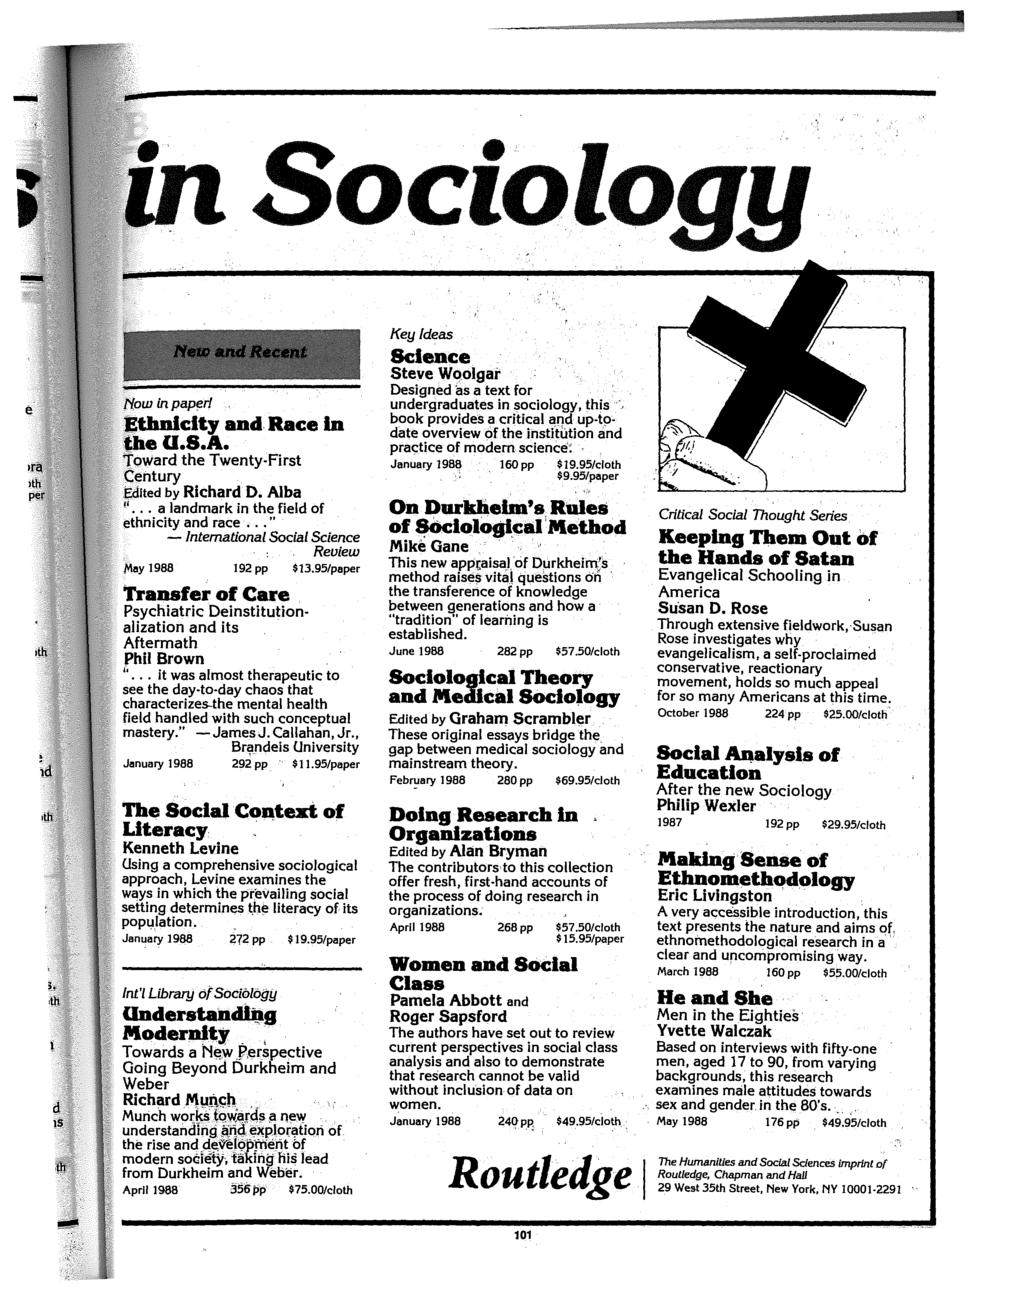 Sociology {'(ow in papf!r/ Ethnlcity and Race In the U.S.A. Toward the Twenty-First Century Edited by Richard D. Alba r' a landmark in the field of ethnicity and race.